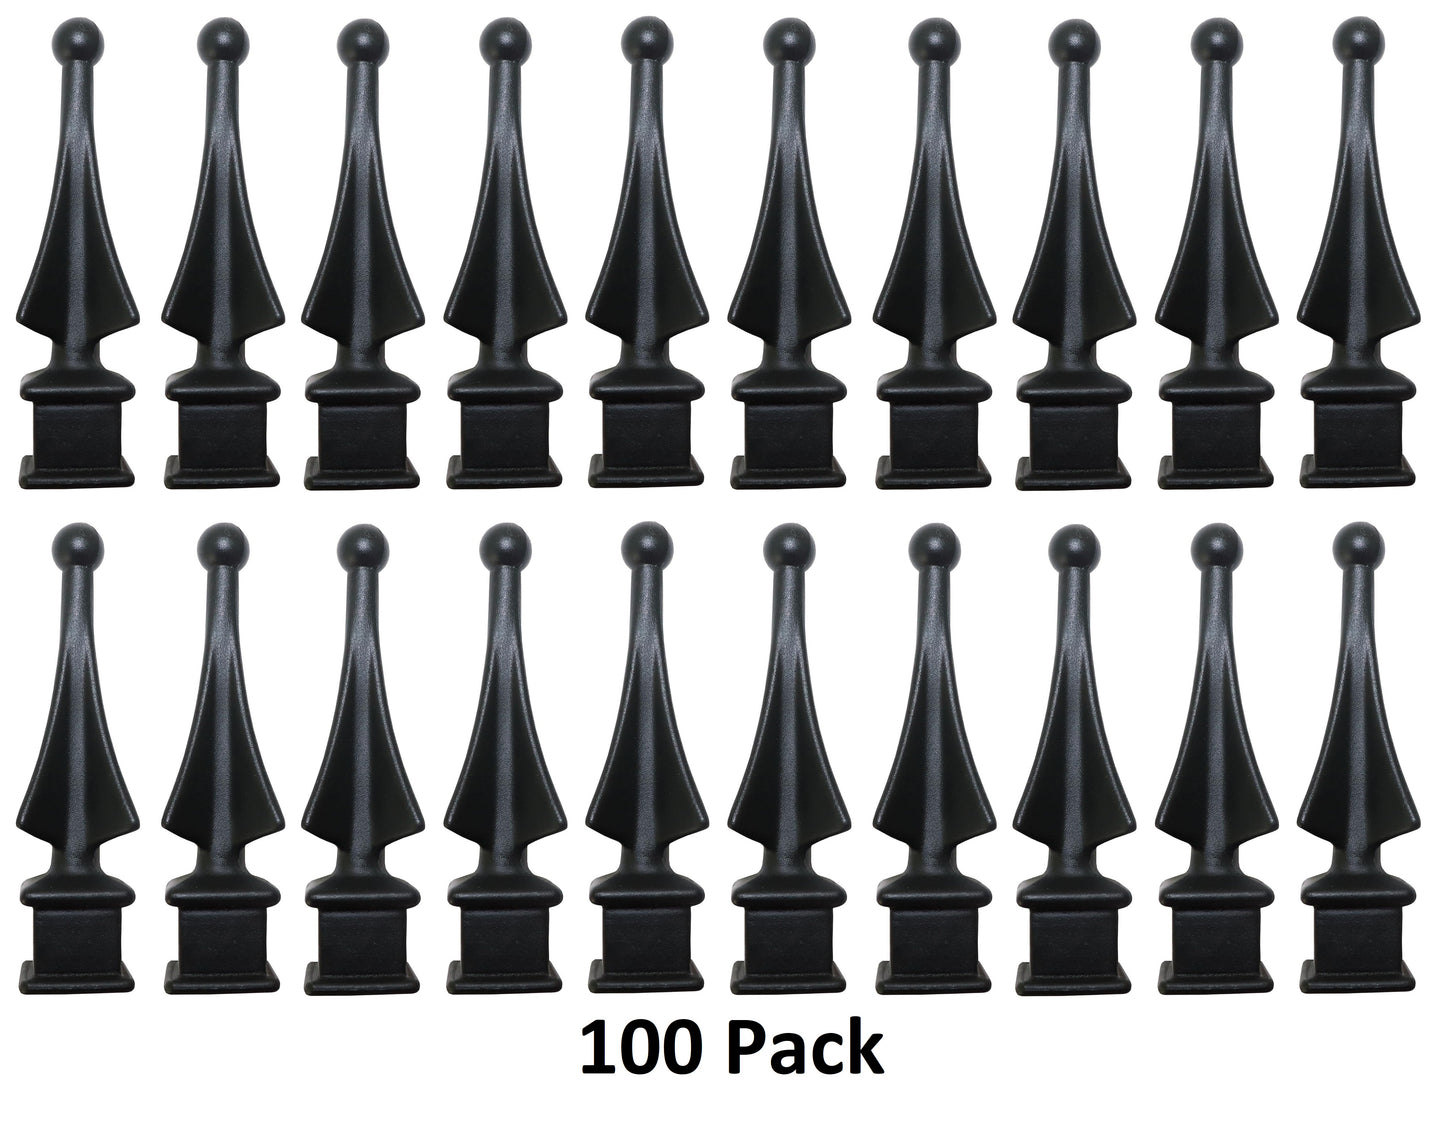 Black Plastic 1/2" Four-Sided Spire Wing Tip Finial Fence Topper for Iron Picket Fence 1/2" posts